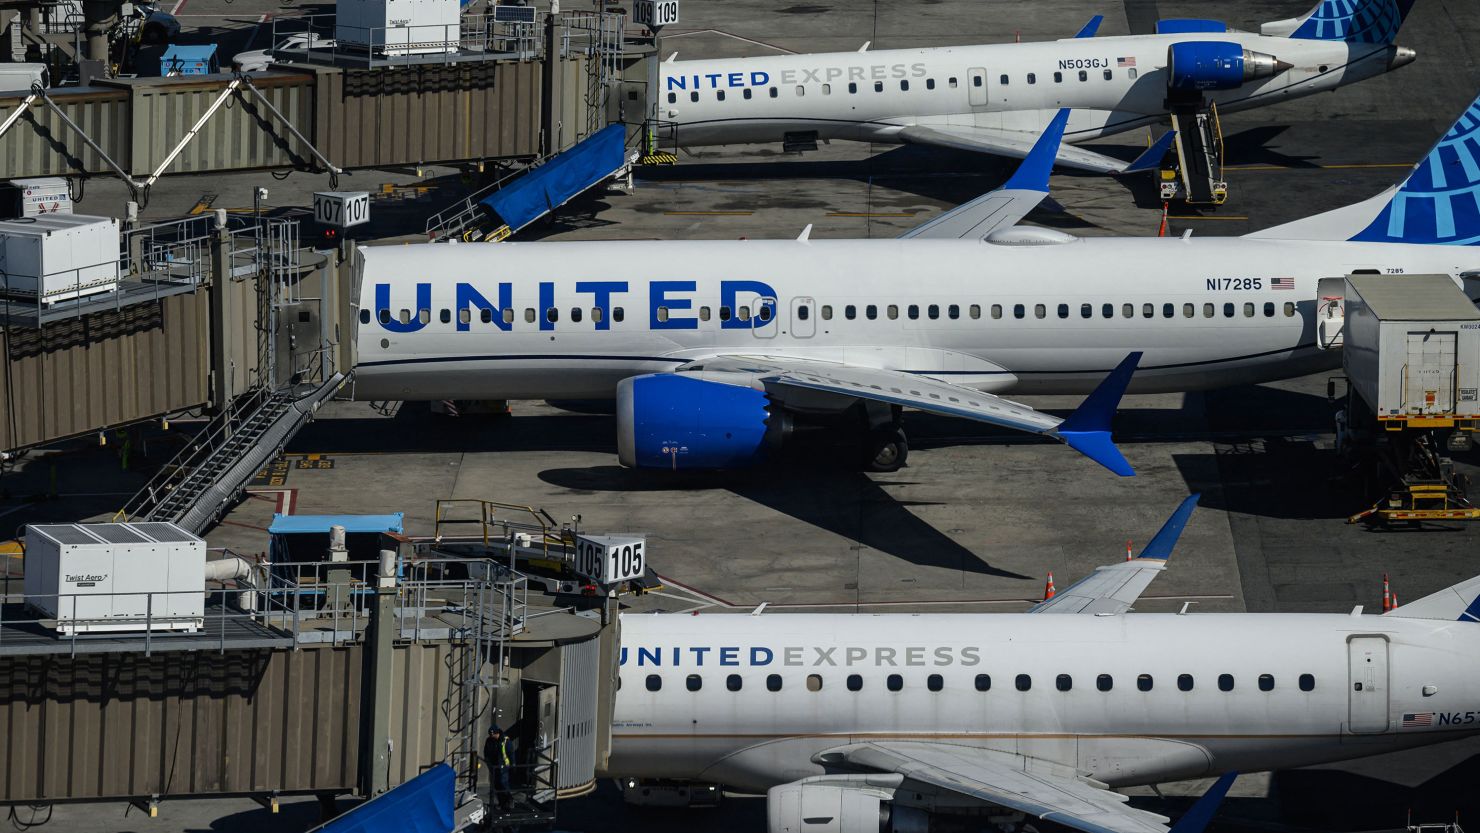 7 people taken to New York hospital for observation after 'severe turbulence' on United Airlines flight